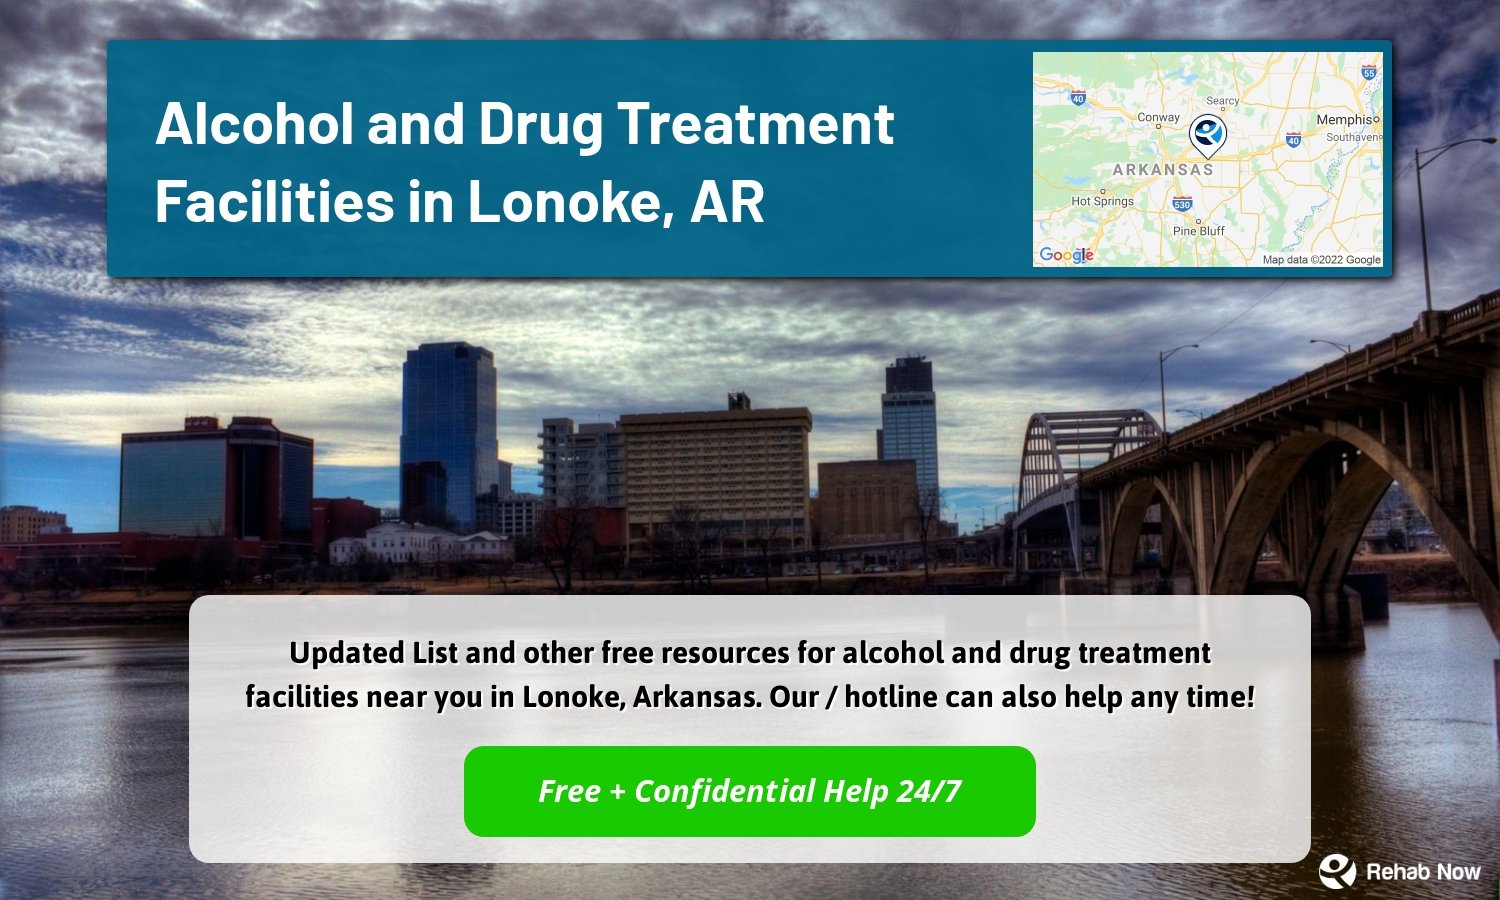  Updated List and other free resources for alcohol and drug treatment facilities near you in Lonoke, Arkansas. Our / hotline can also help any time!